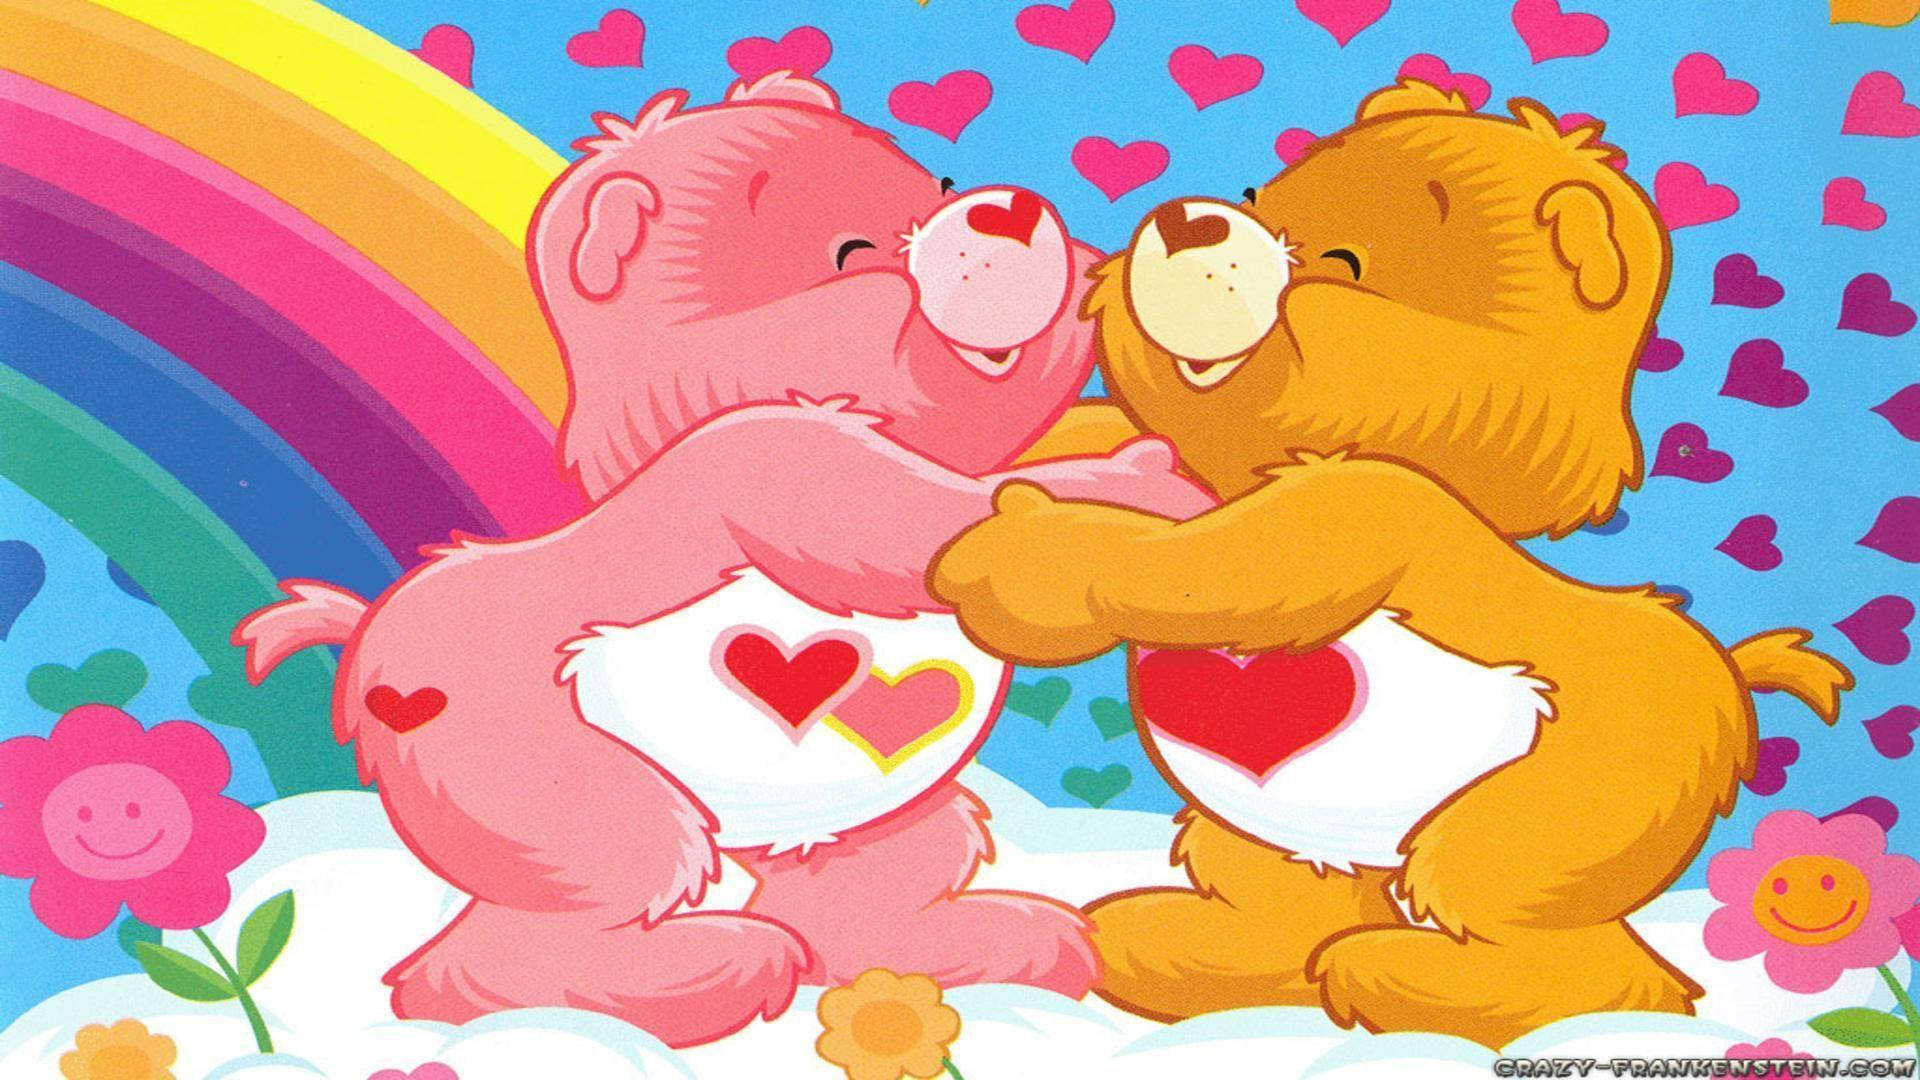 Care Bears Holding Hands